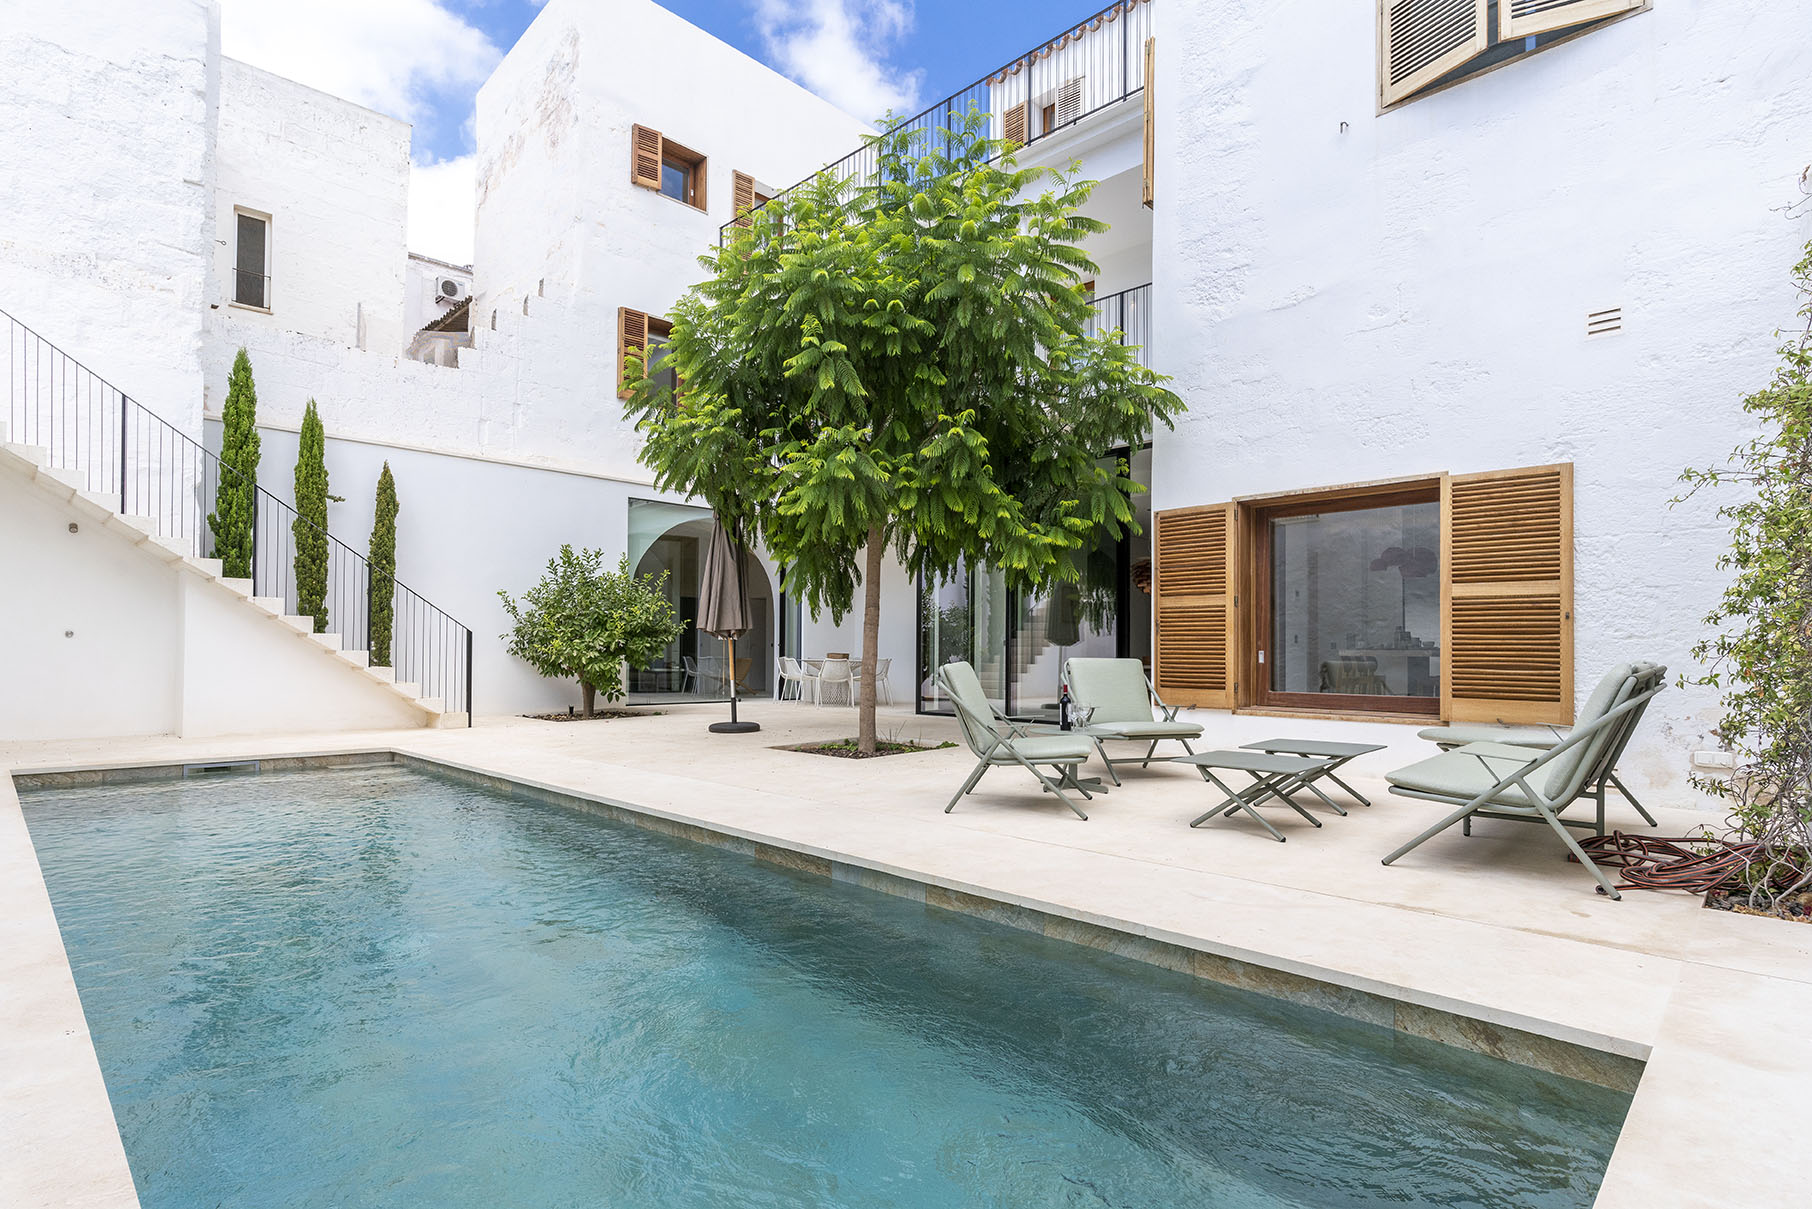 Set in heart of the beautiful Medieval city of Ciutadella, this award-winning property restored by renowned Finnish and Japanese architects Anssi Lassila and Kazunori Yamaguchi, is a masterpiece of renovation that breathes new life into a historic part of the city’s fabric.